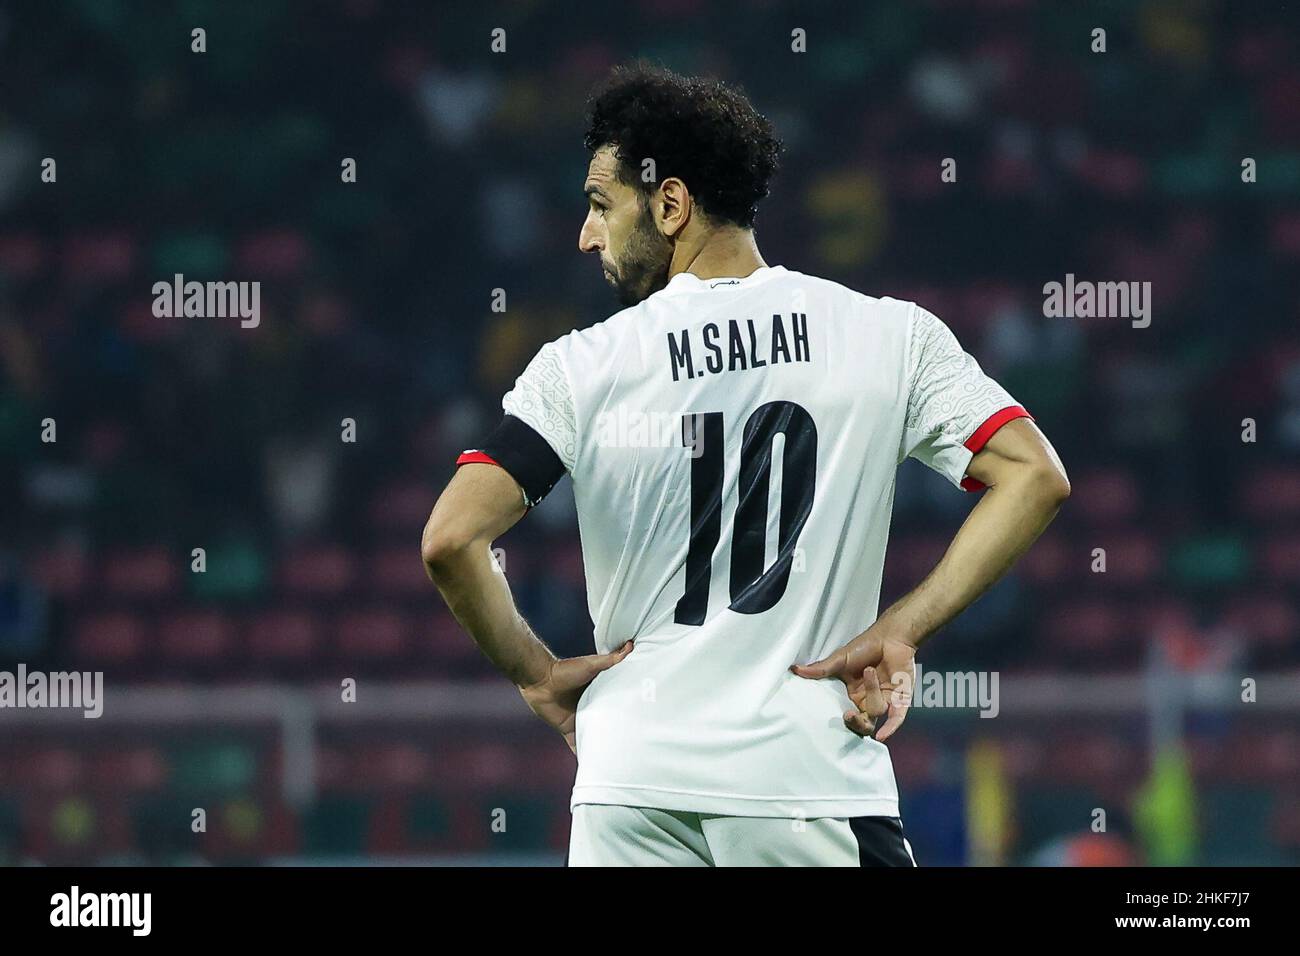 CAMEROON, Yaounde, 03 February 2022 - Mohamed Salah of Egypt during the Africa Cup of Nations play offs semi final match between Cameroon and Egypt at Stade d'Olembe, Yaounde, Cameroon, 03/02/2022/ Photo by SF Credit: Sebo47/Alamy Live News Stock Photo